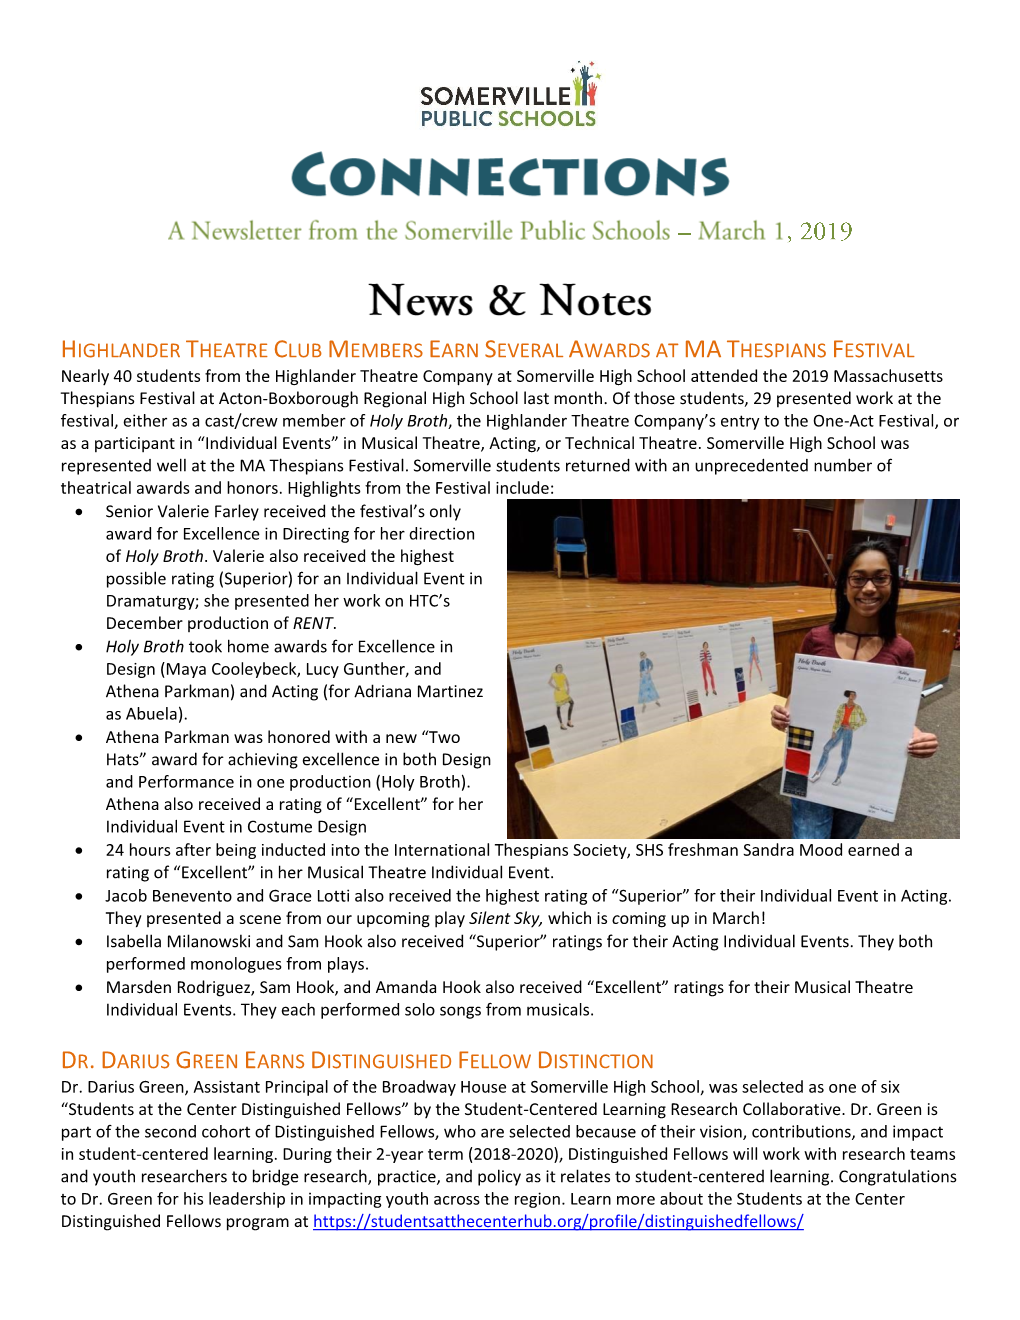 Connections: a Newsletter from the Somerville Public Schools – May 10